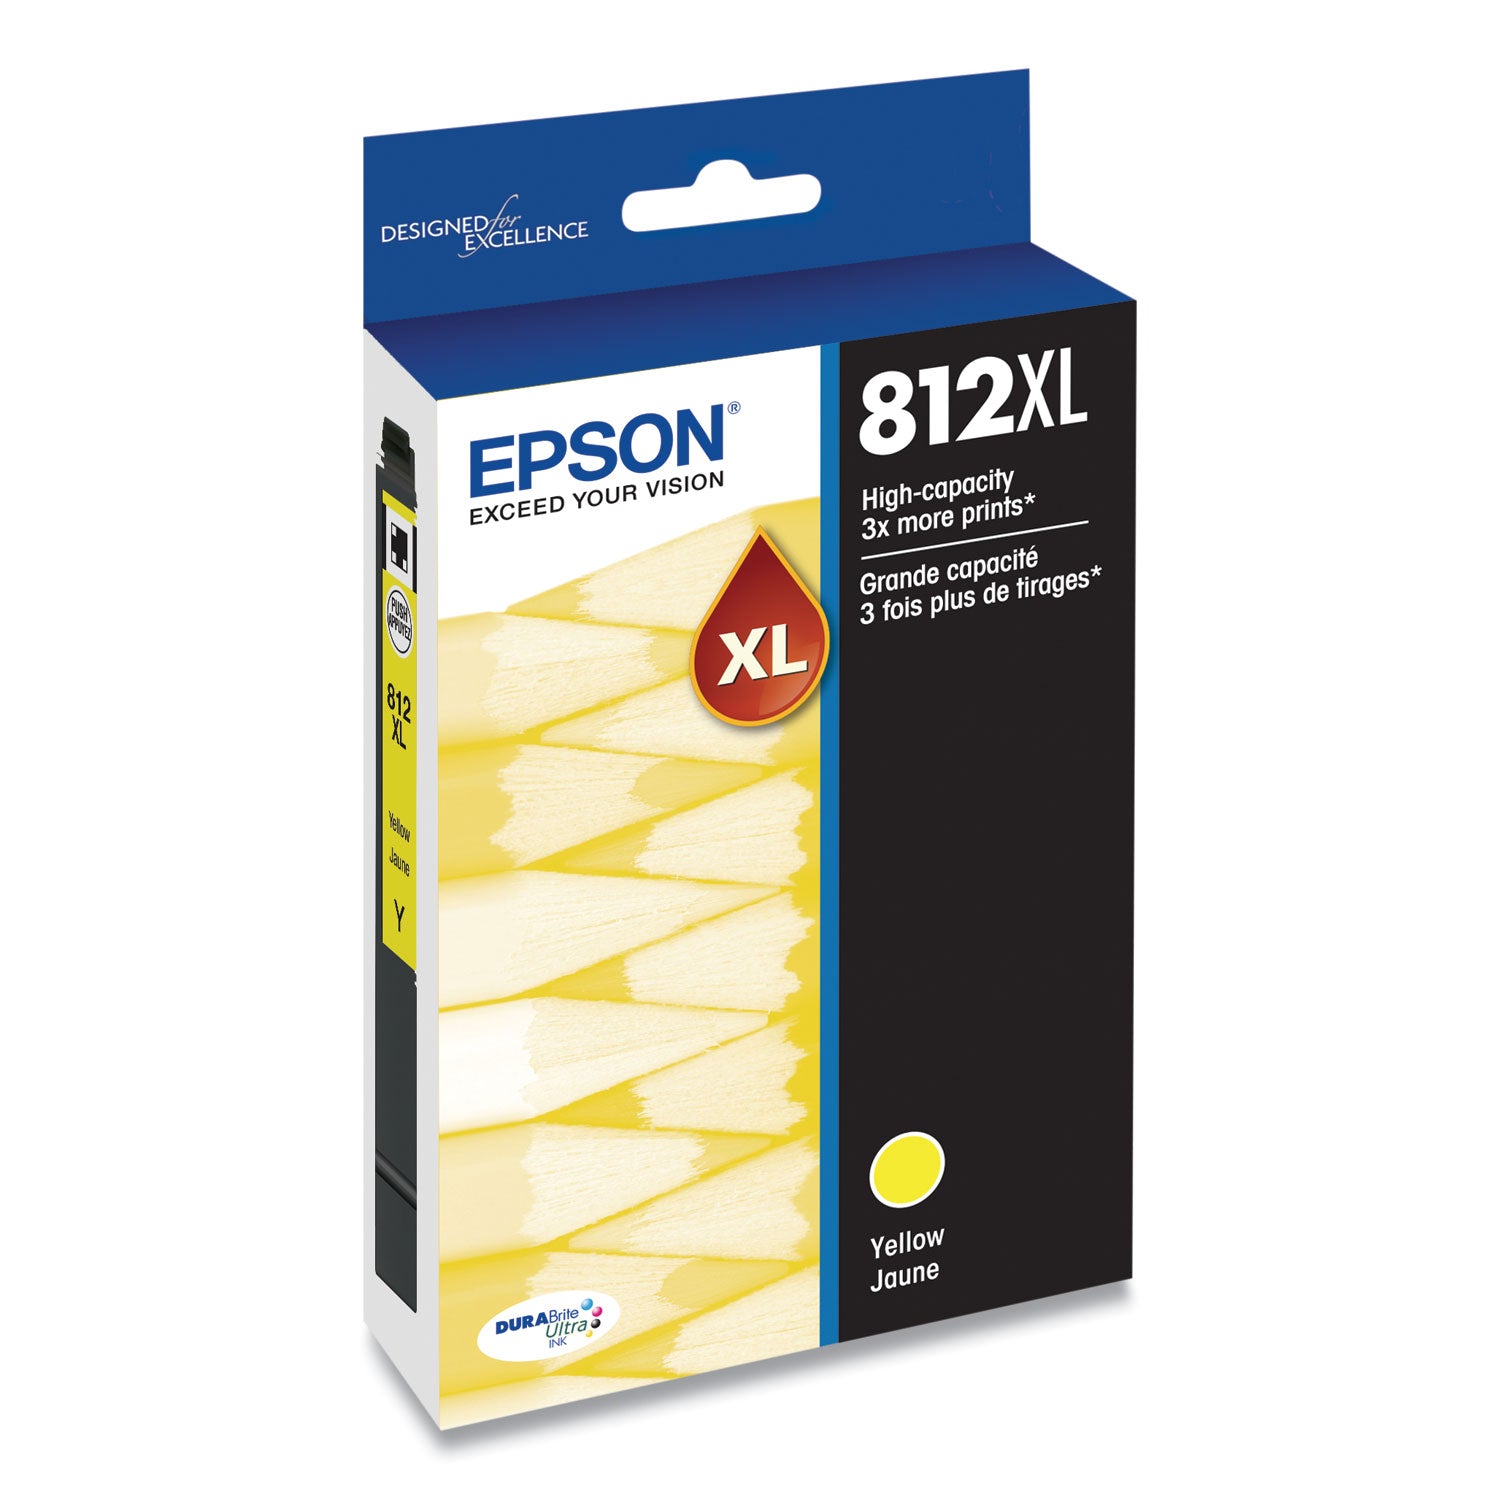 t812xl420-s-t812xl-durabrite-ultra-high-yield-ink-1100-page-yield-yellow_epst812xl420s - 2